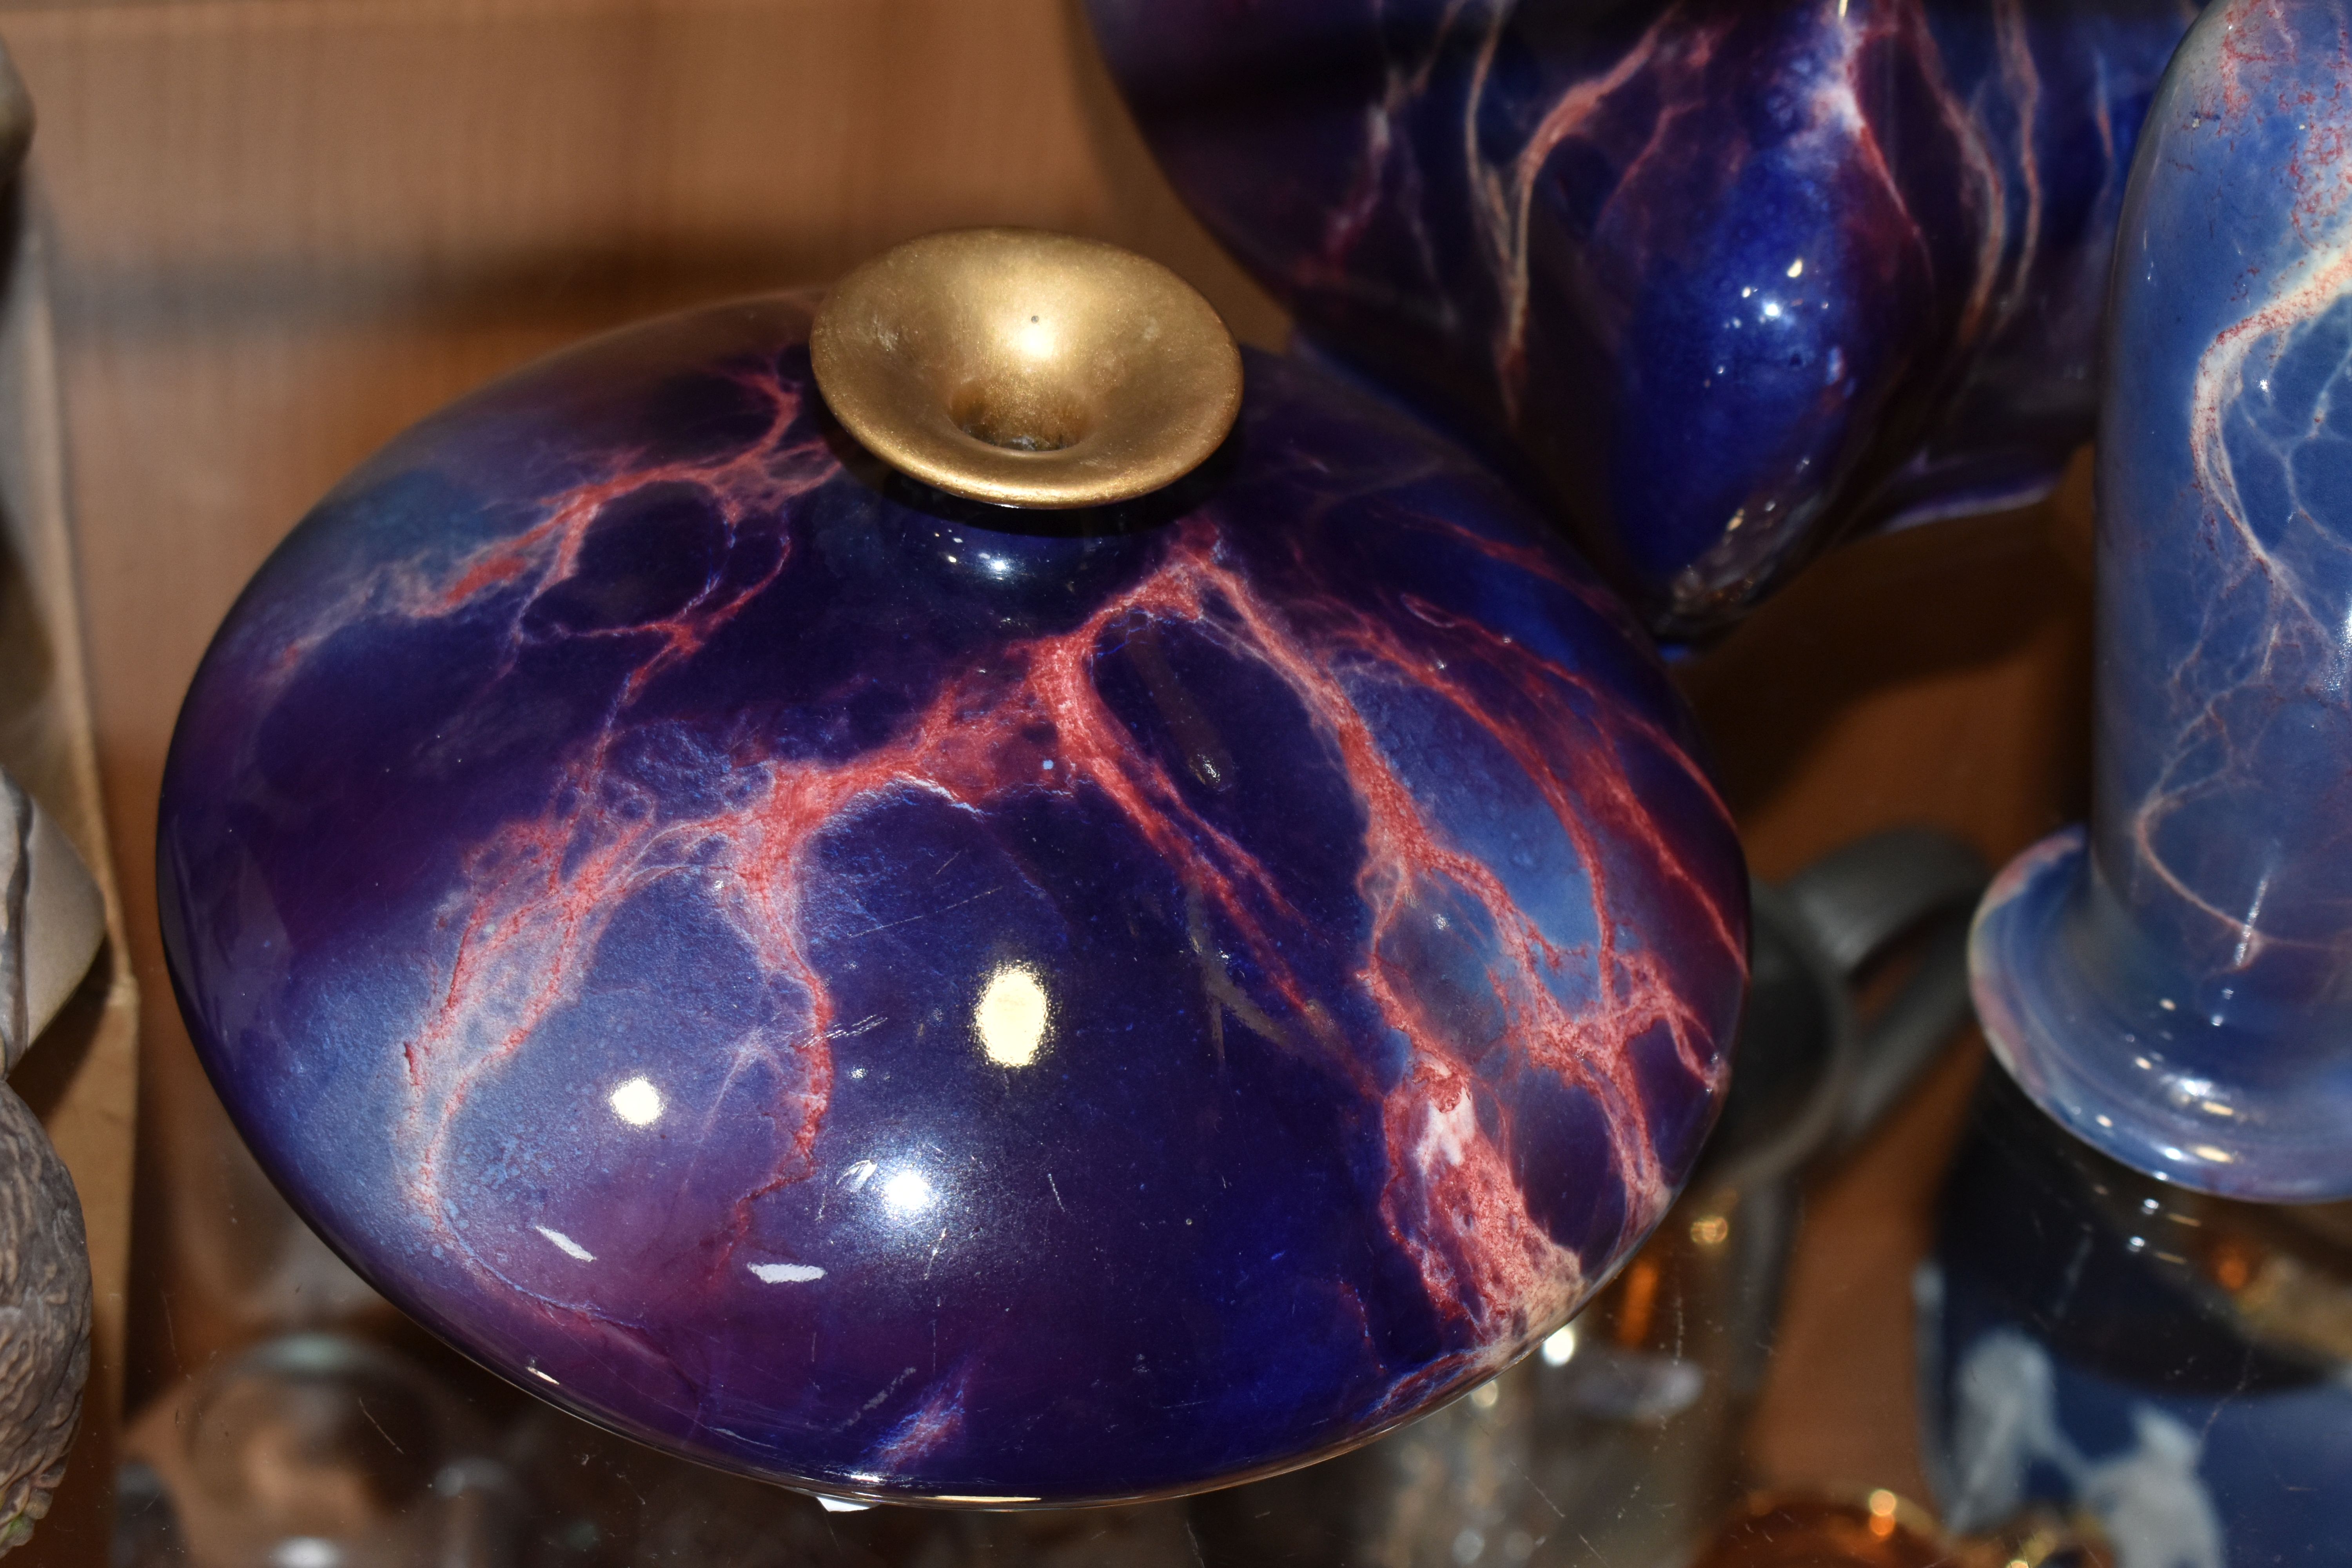 FIVE WILKINSON'S ROYAL STAFFS POTTERY ORIFLAMME VASES, with marbled purple and pink glazes, - Image 2 of 9